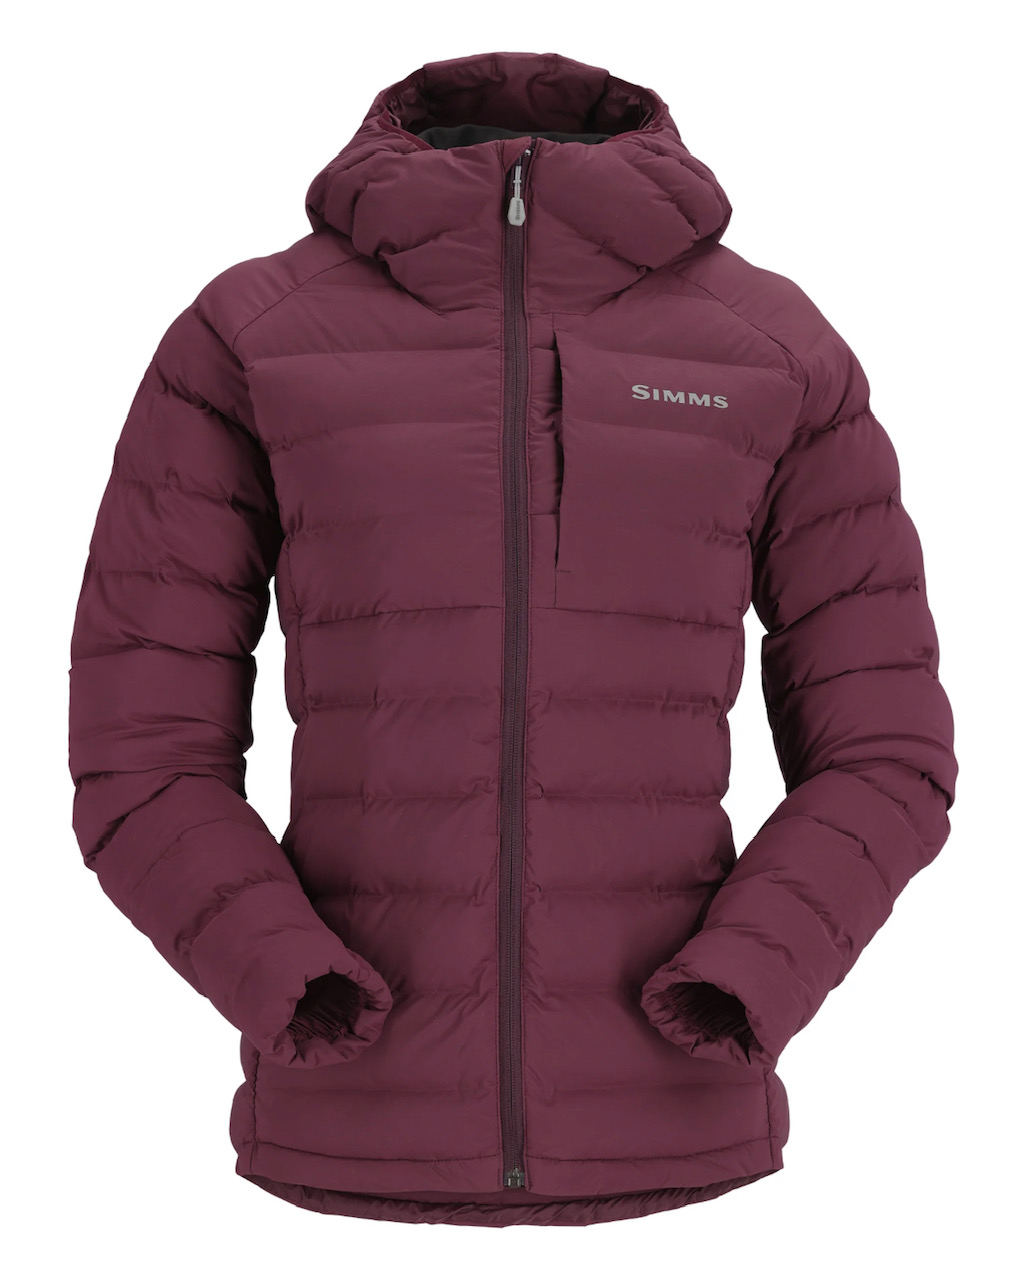 Simms W's ExStream Hooded Jacket - Mulberry - XL